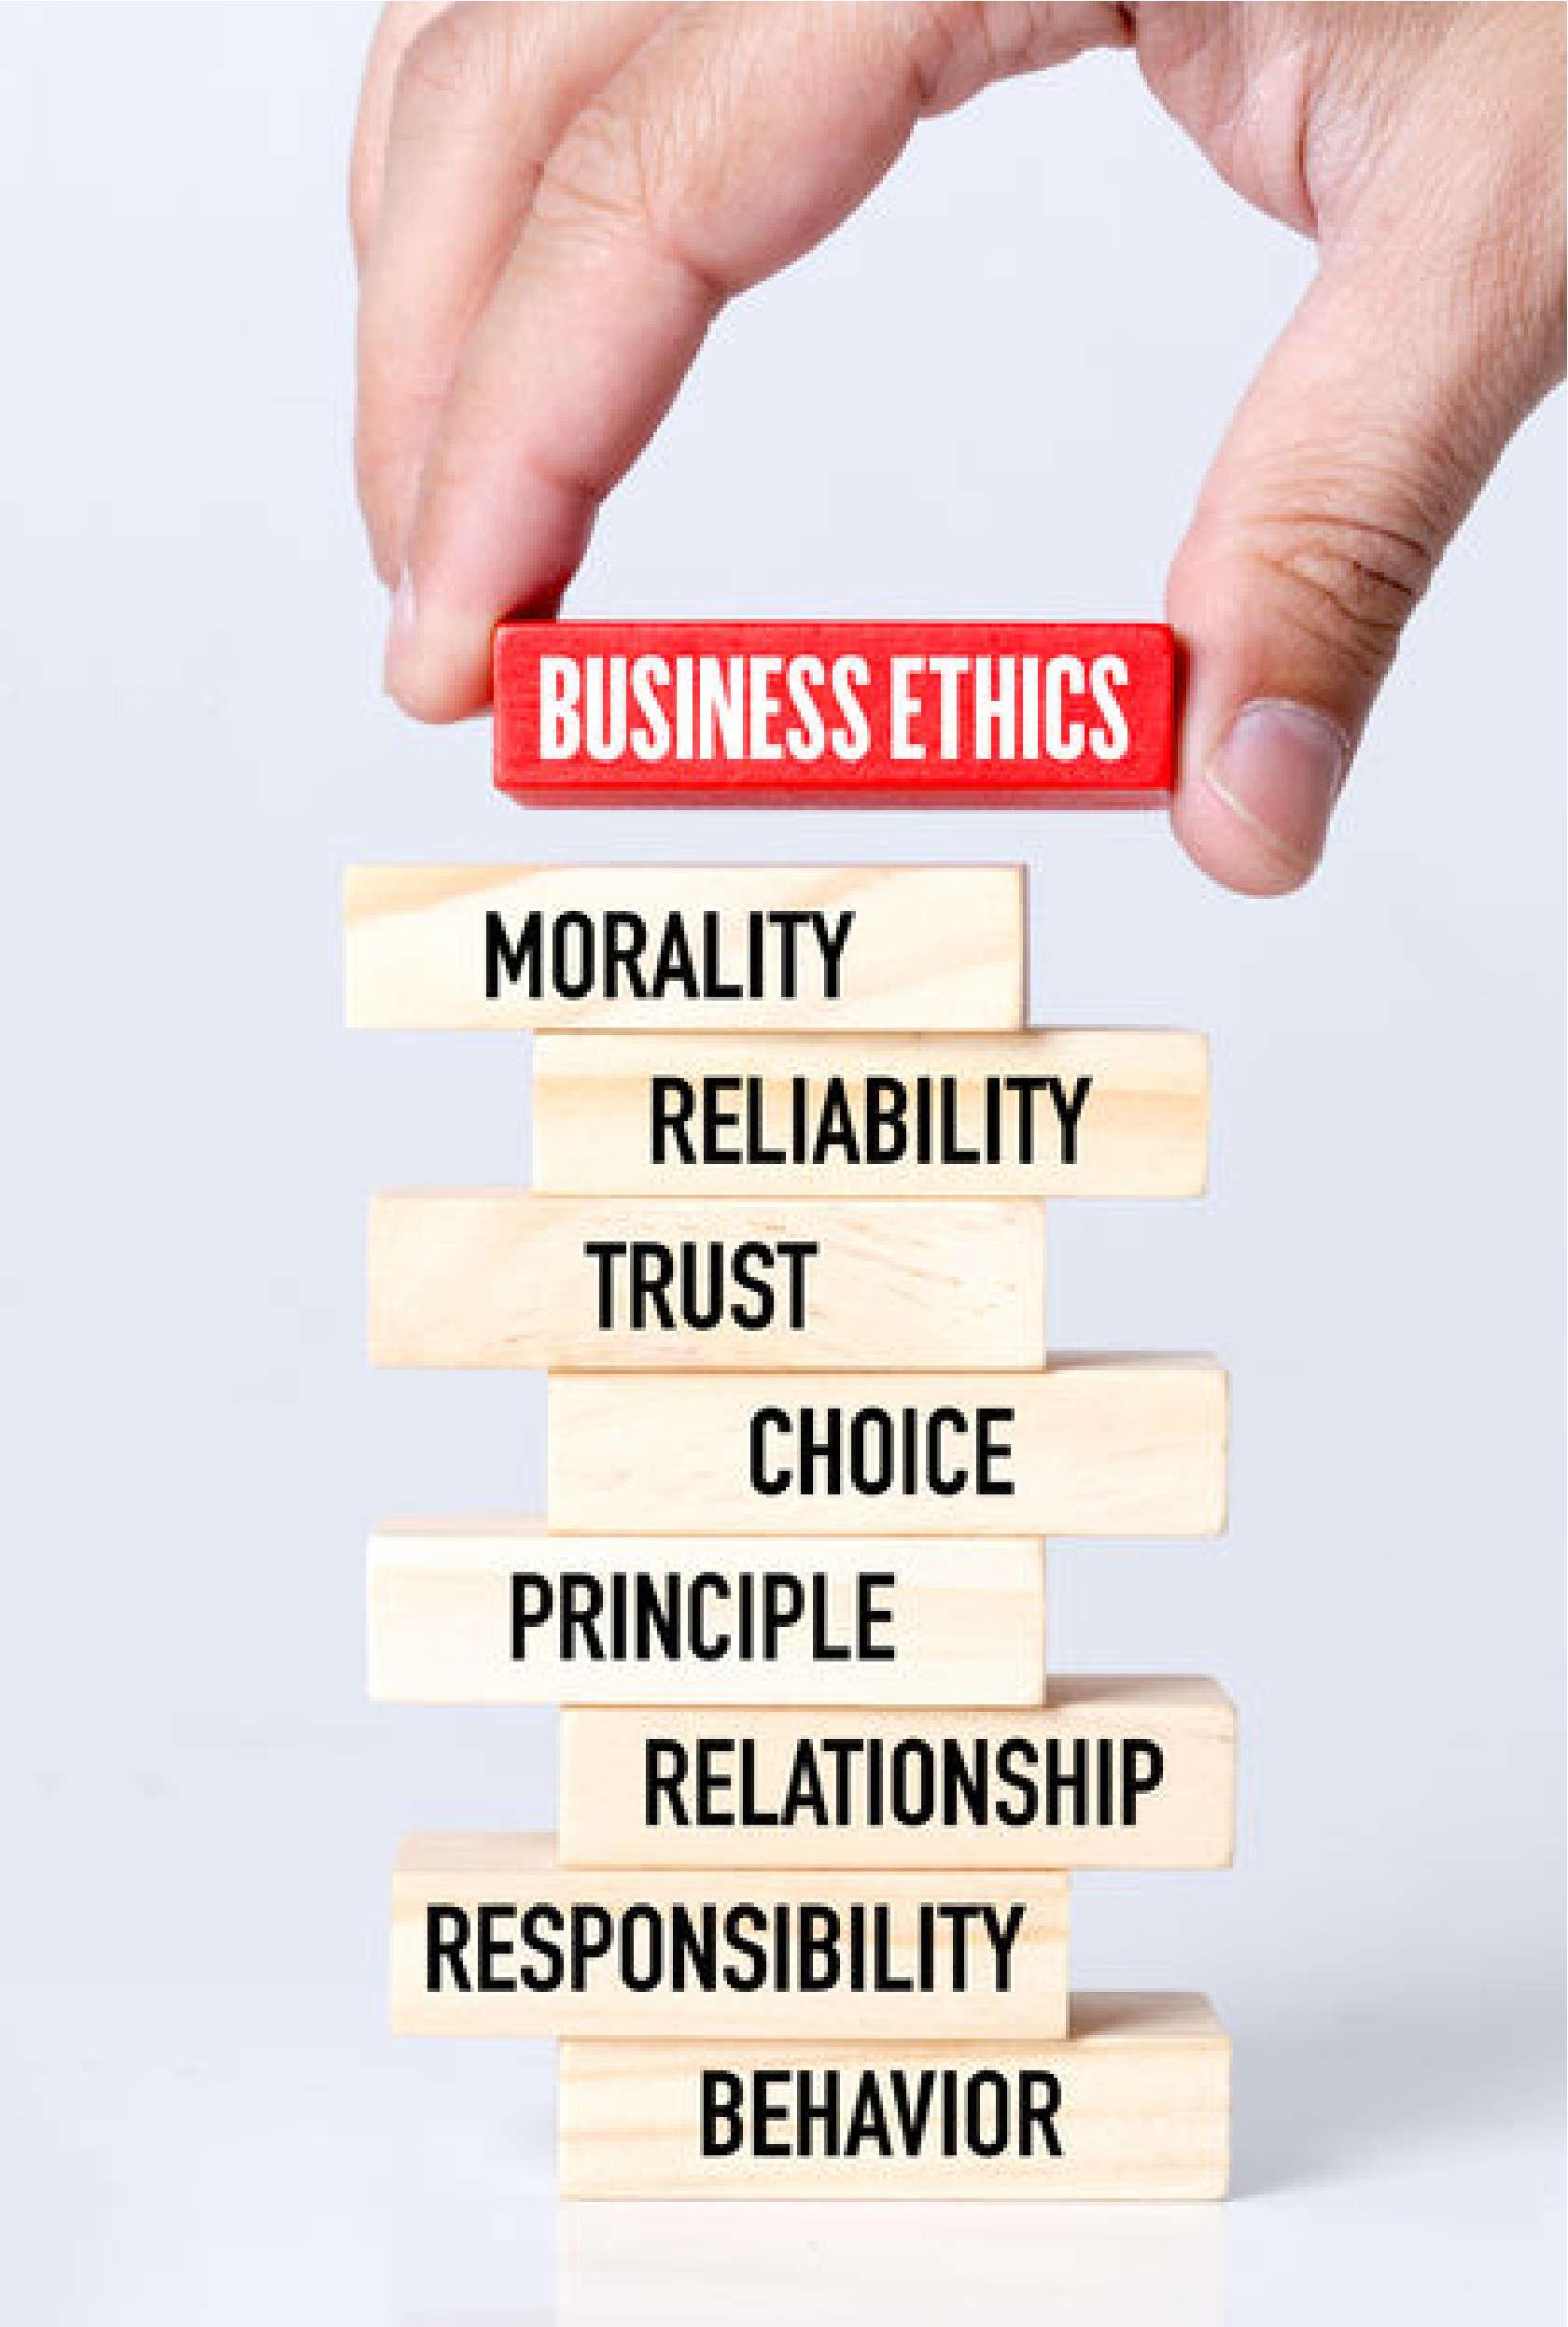 Business Ethics cropped